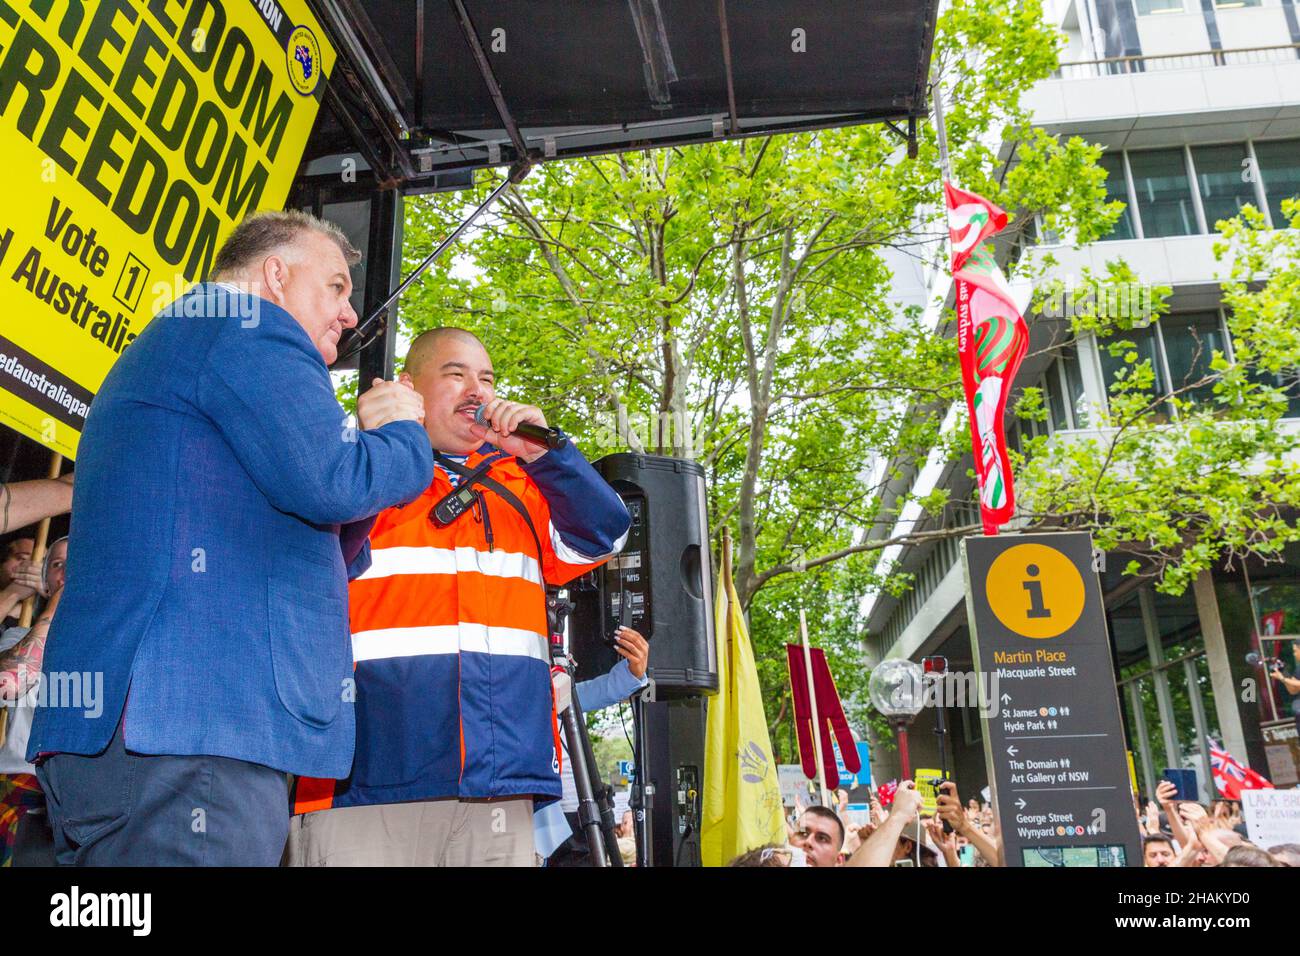 The World Wide Freedom Day Rally, held in Sydney, Australia on 20 November 2021 to protest coronavirus restrictions and lockdowns. The event commenced in Hyde Park and was followed by a protest march through city streets and speeches and performances in Martin Place. Pictured: Craig Kelly of the UAP, United Australia Party (left) addresses the crowd in Martin Place with the 'Aussie Cossack', Simeon Boikov. Stock Photo